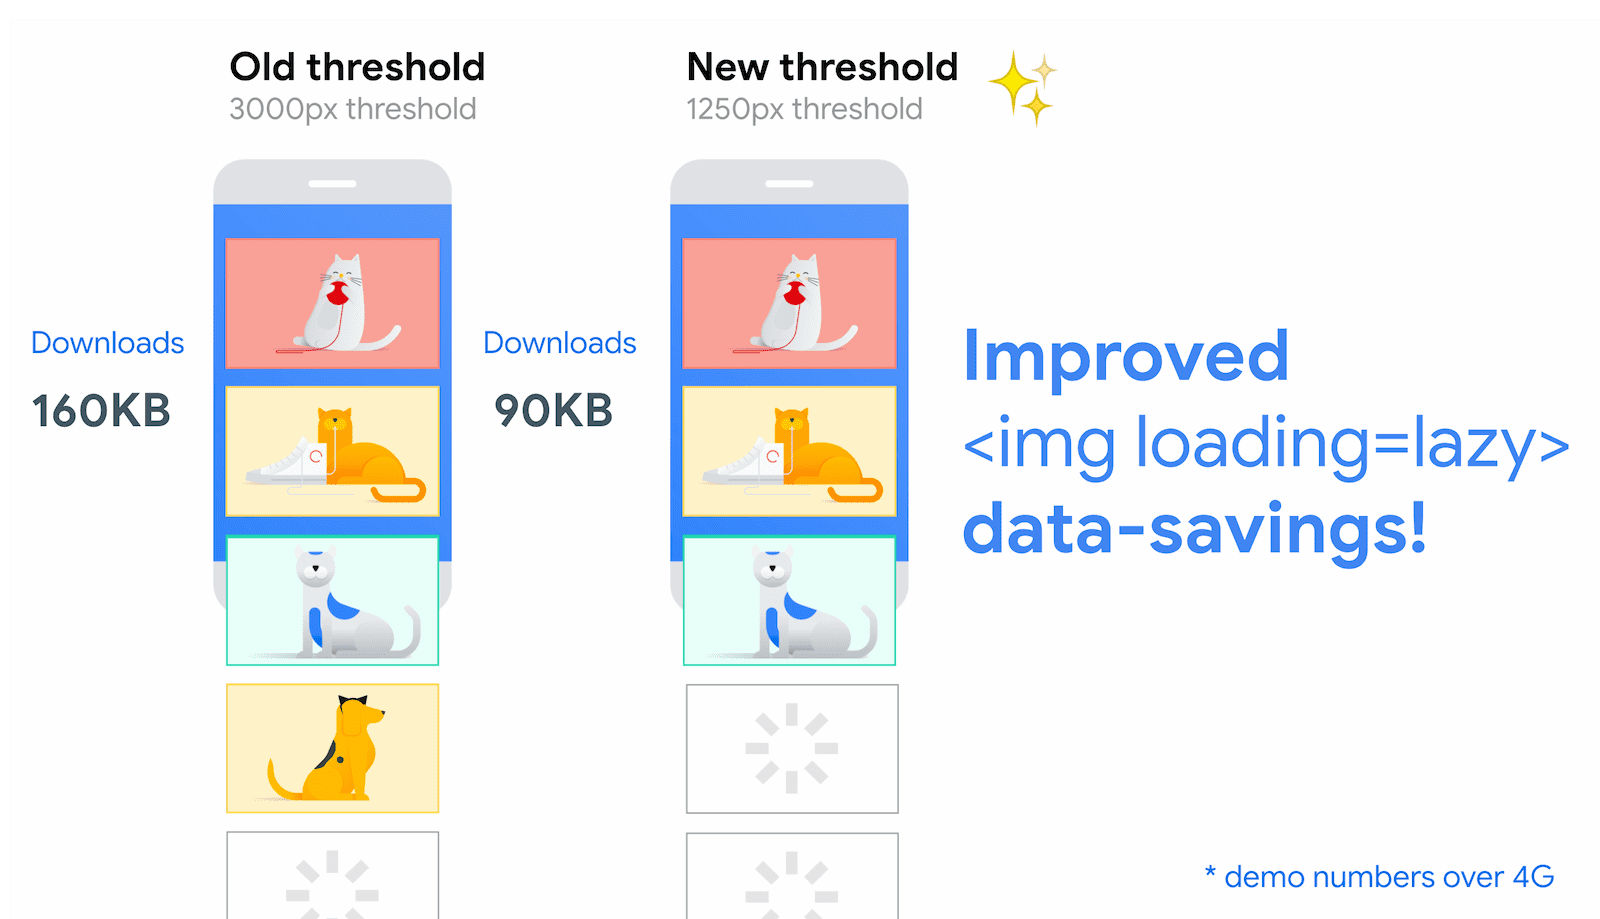 The new and improved thresholds for image lazy loading, reducing the distance-from-viewport thresholds for fast connections from 3000px down to 1250px